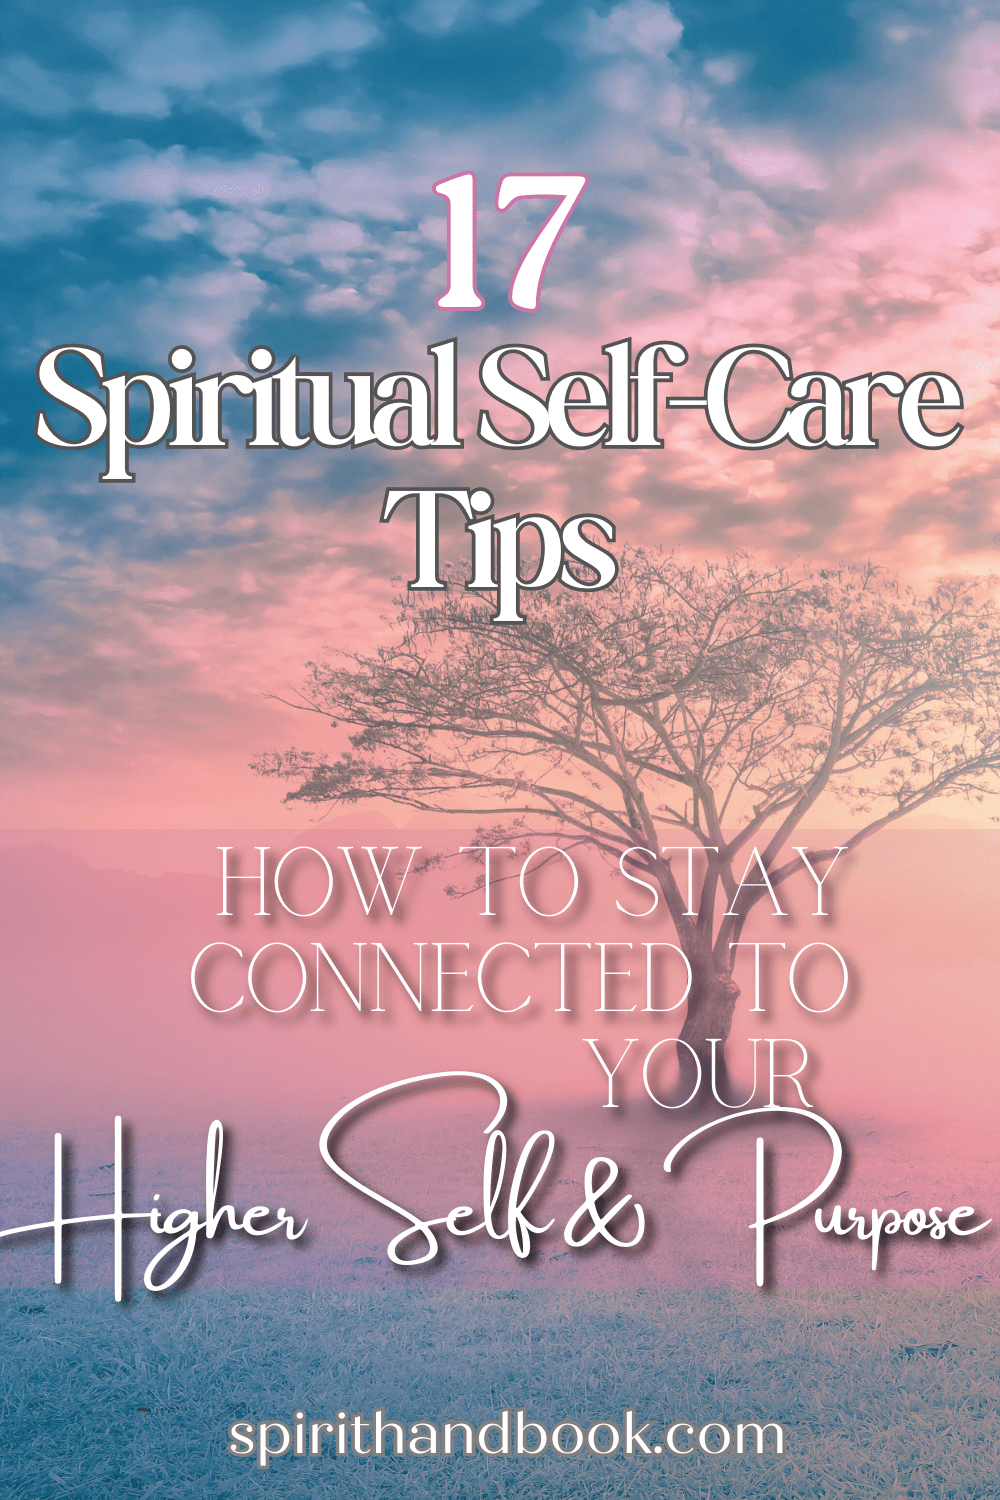 You are currently viewing 17 Spiritual Self-Care Tips: How To Stay Connected To Your Higher Self & Purpose